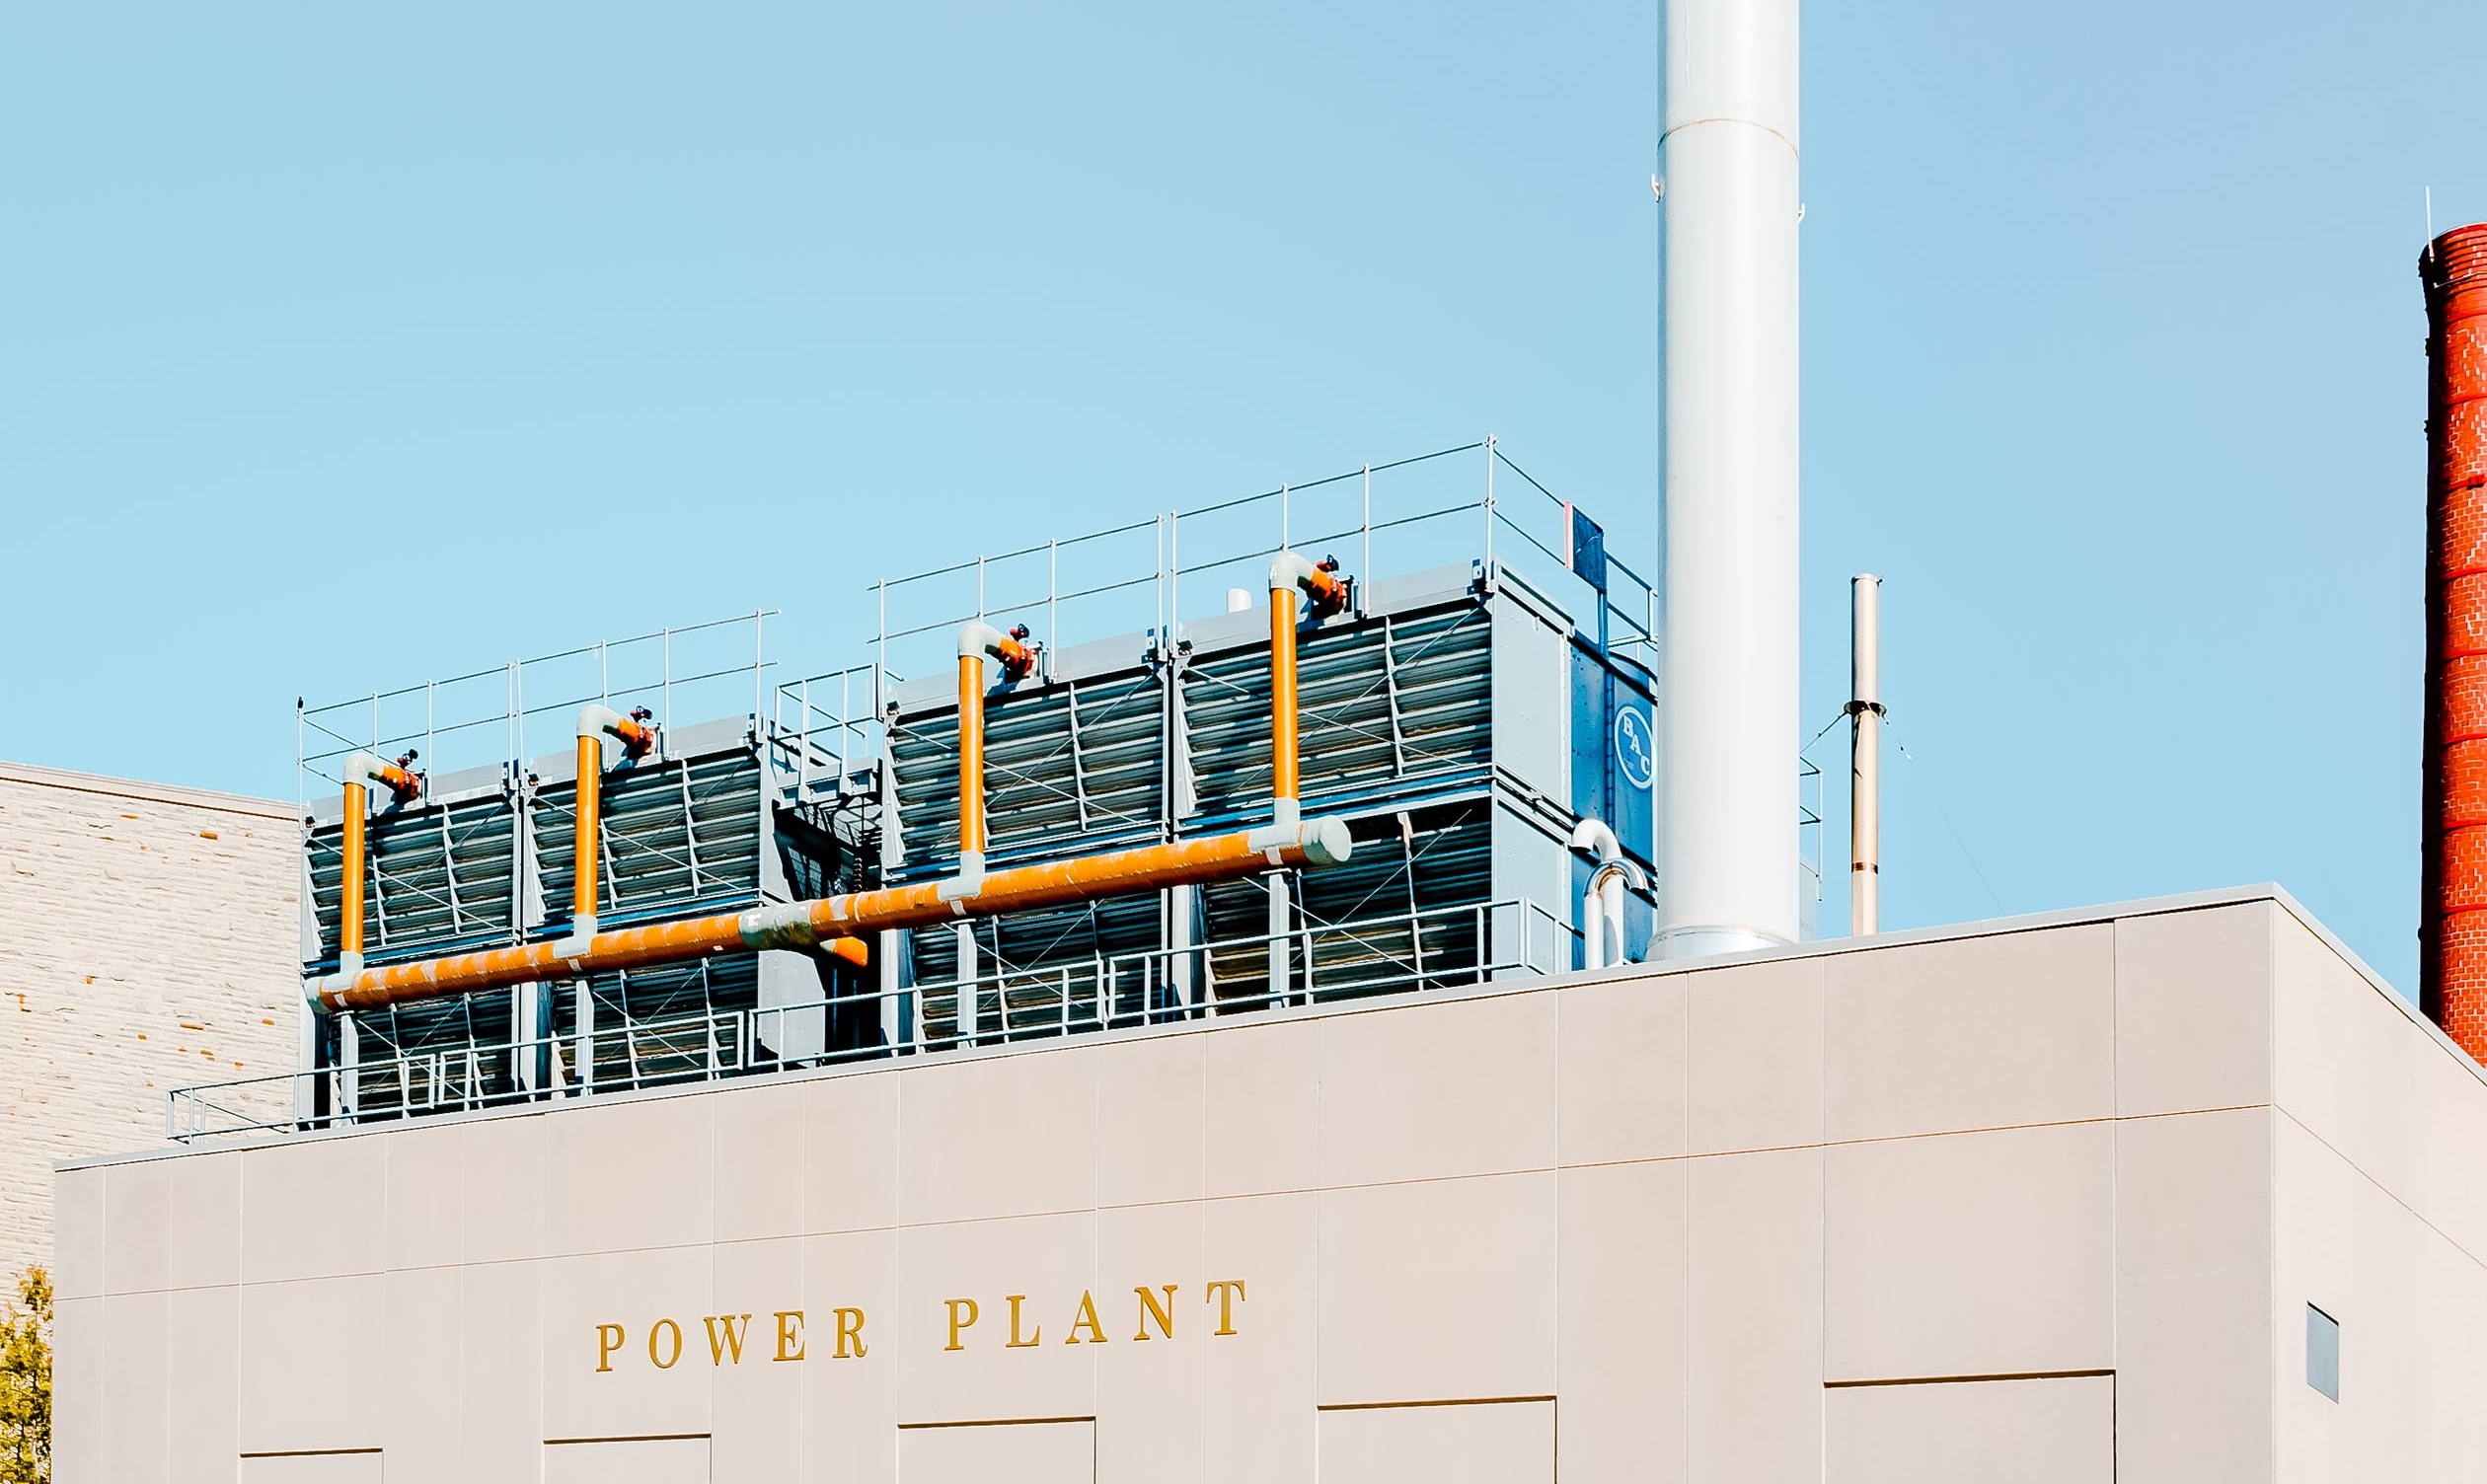 Tidy power plant building with orange pipes against a clear blue sky.